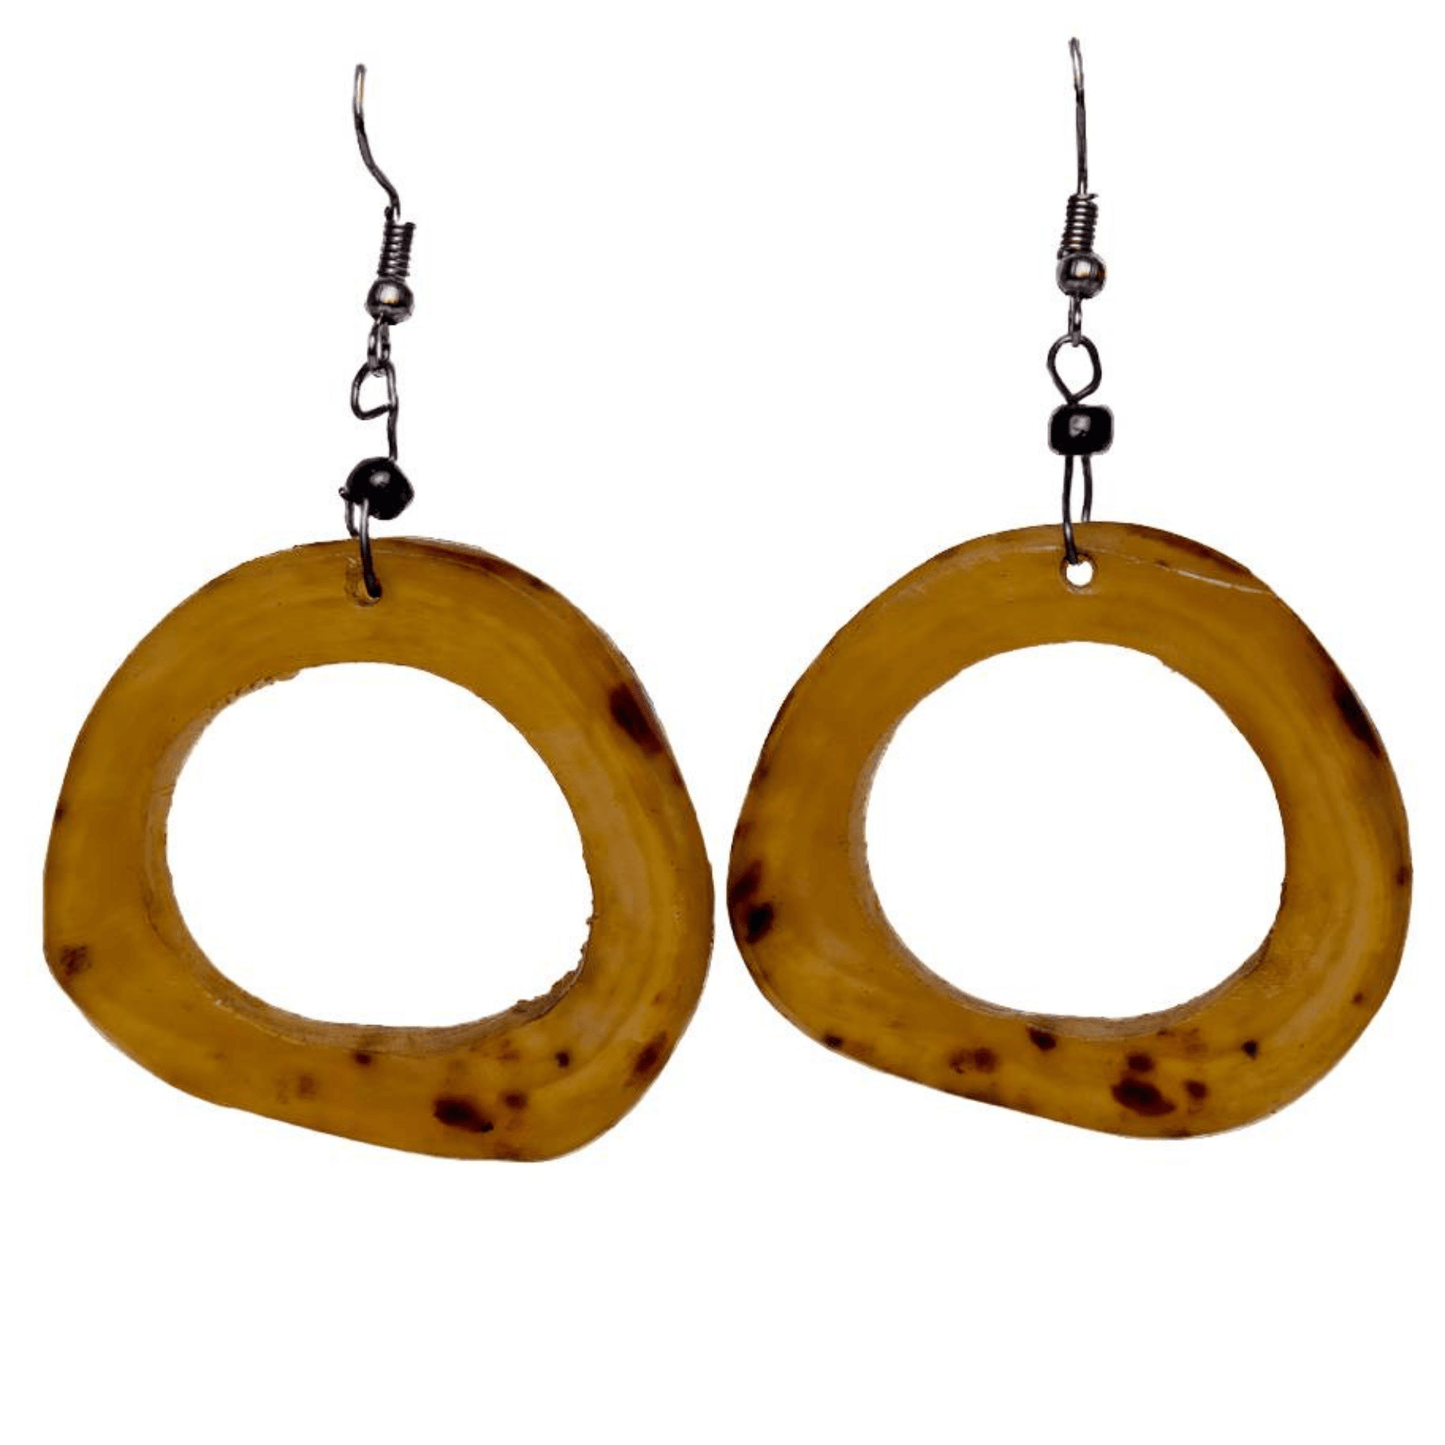 Unique Hoop Earrings made with camel bone